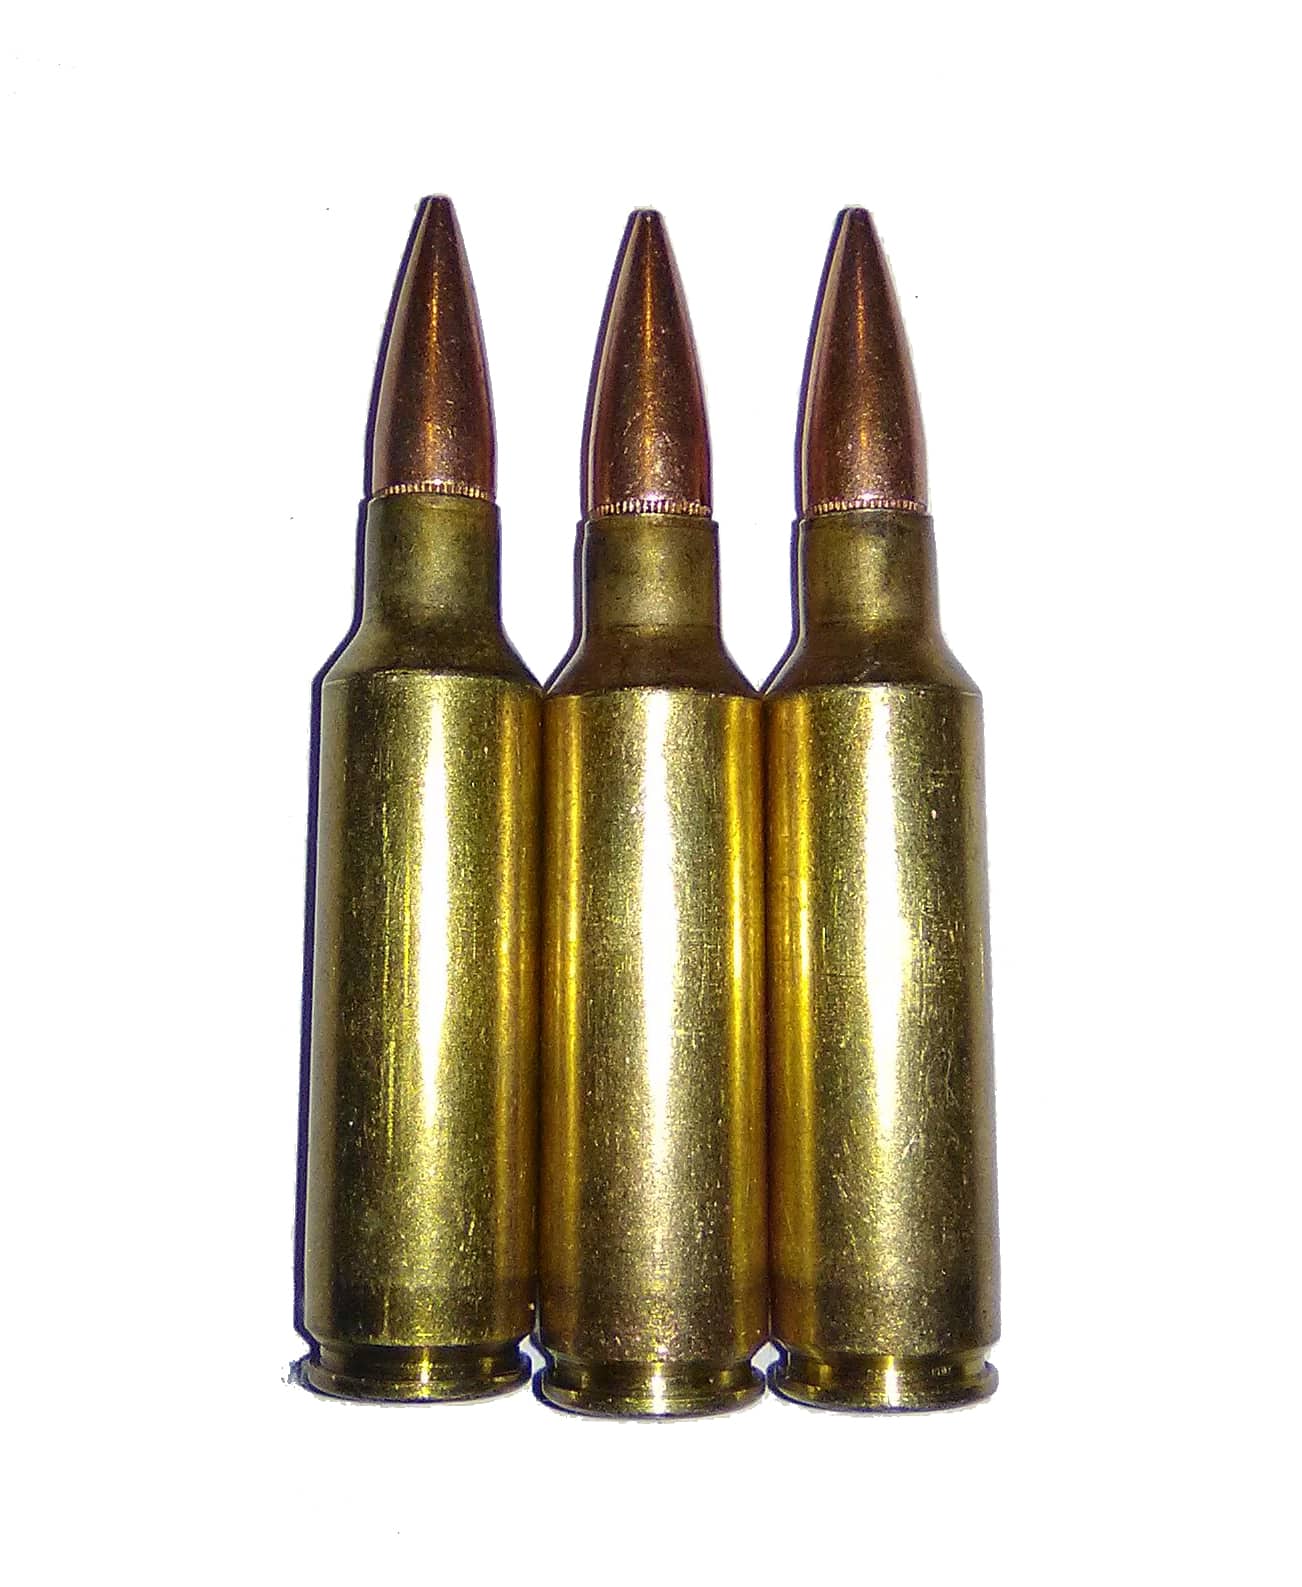 7mm Winchester Short Magnum (7mm WSM) - Snap Caps Dummy Rounds ...